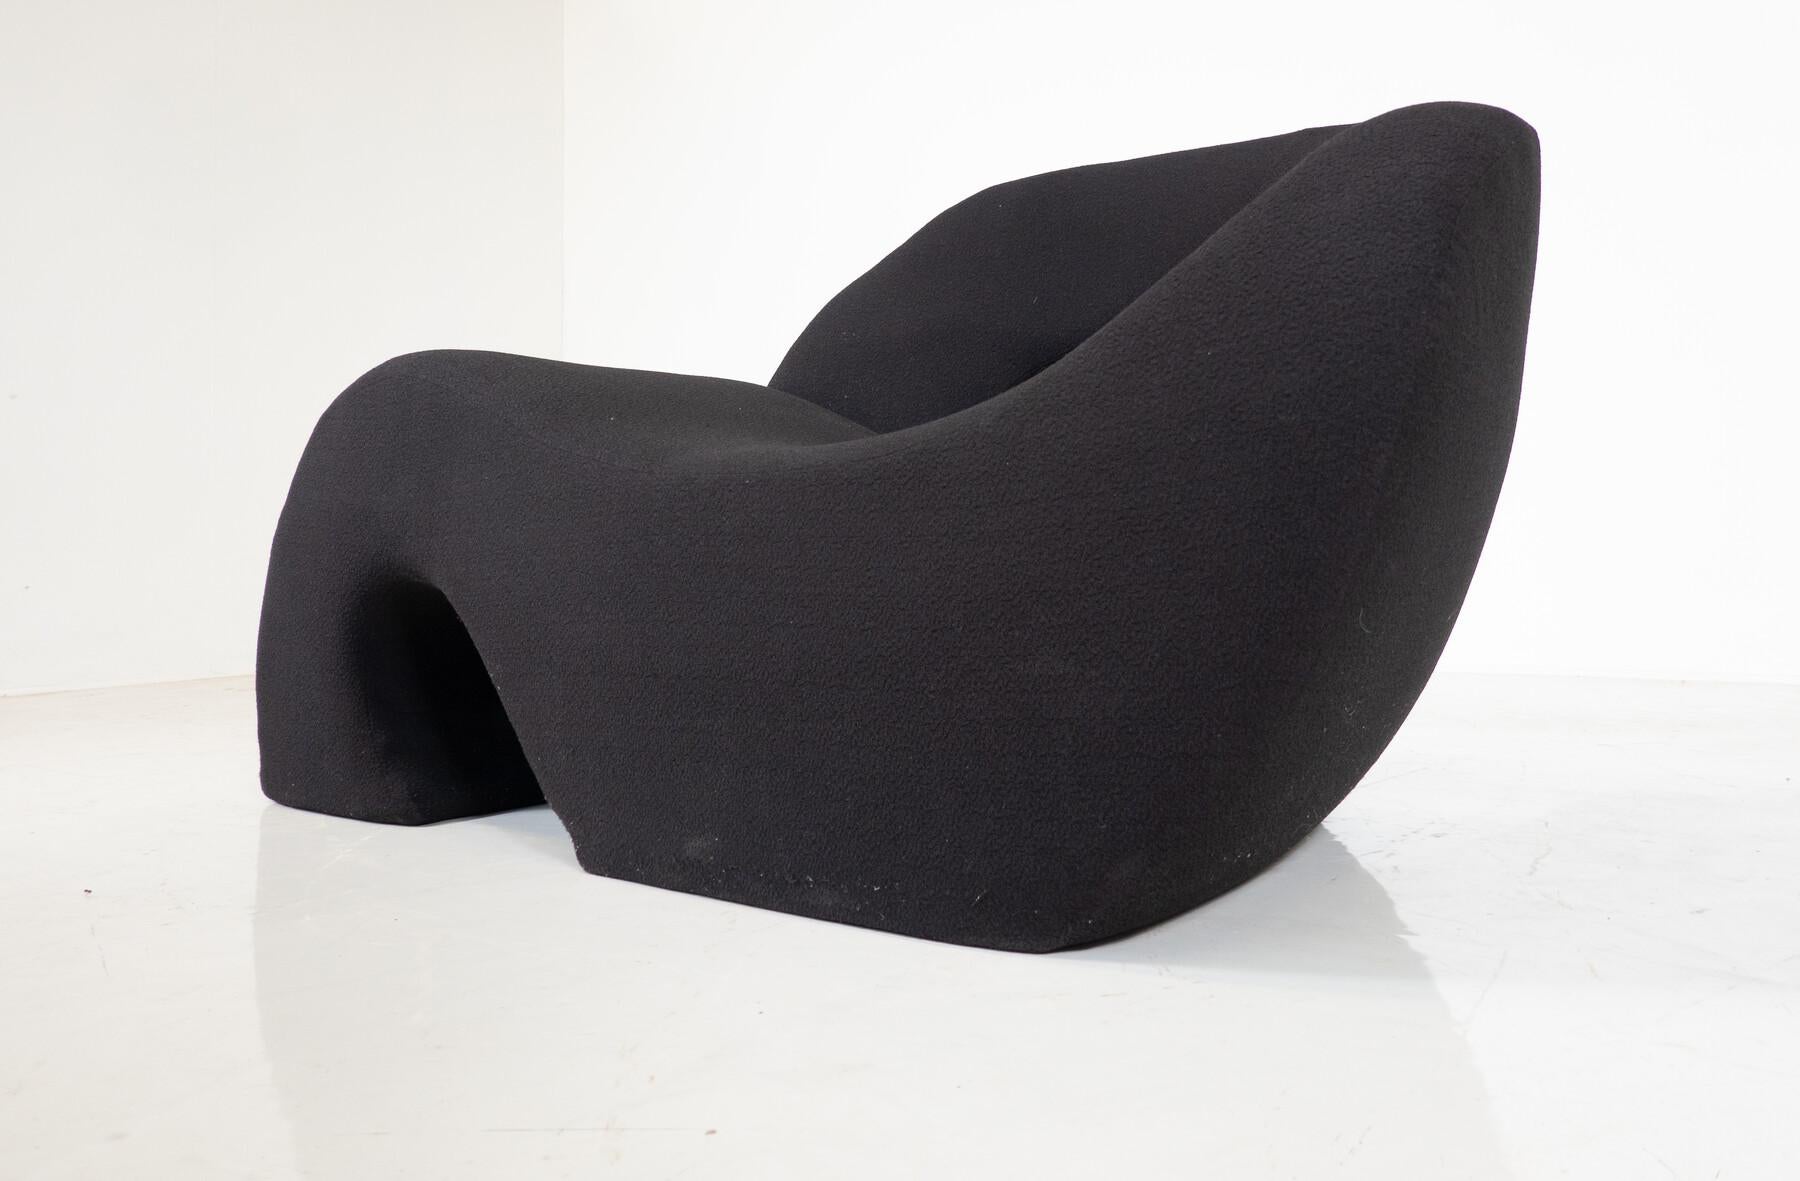 Mid-20th Century Sculptural Sess Lounge Chair by Nani Prina for Sormani, 1968 For Sale